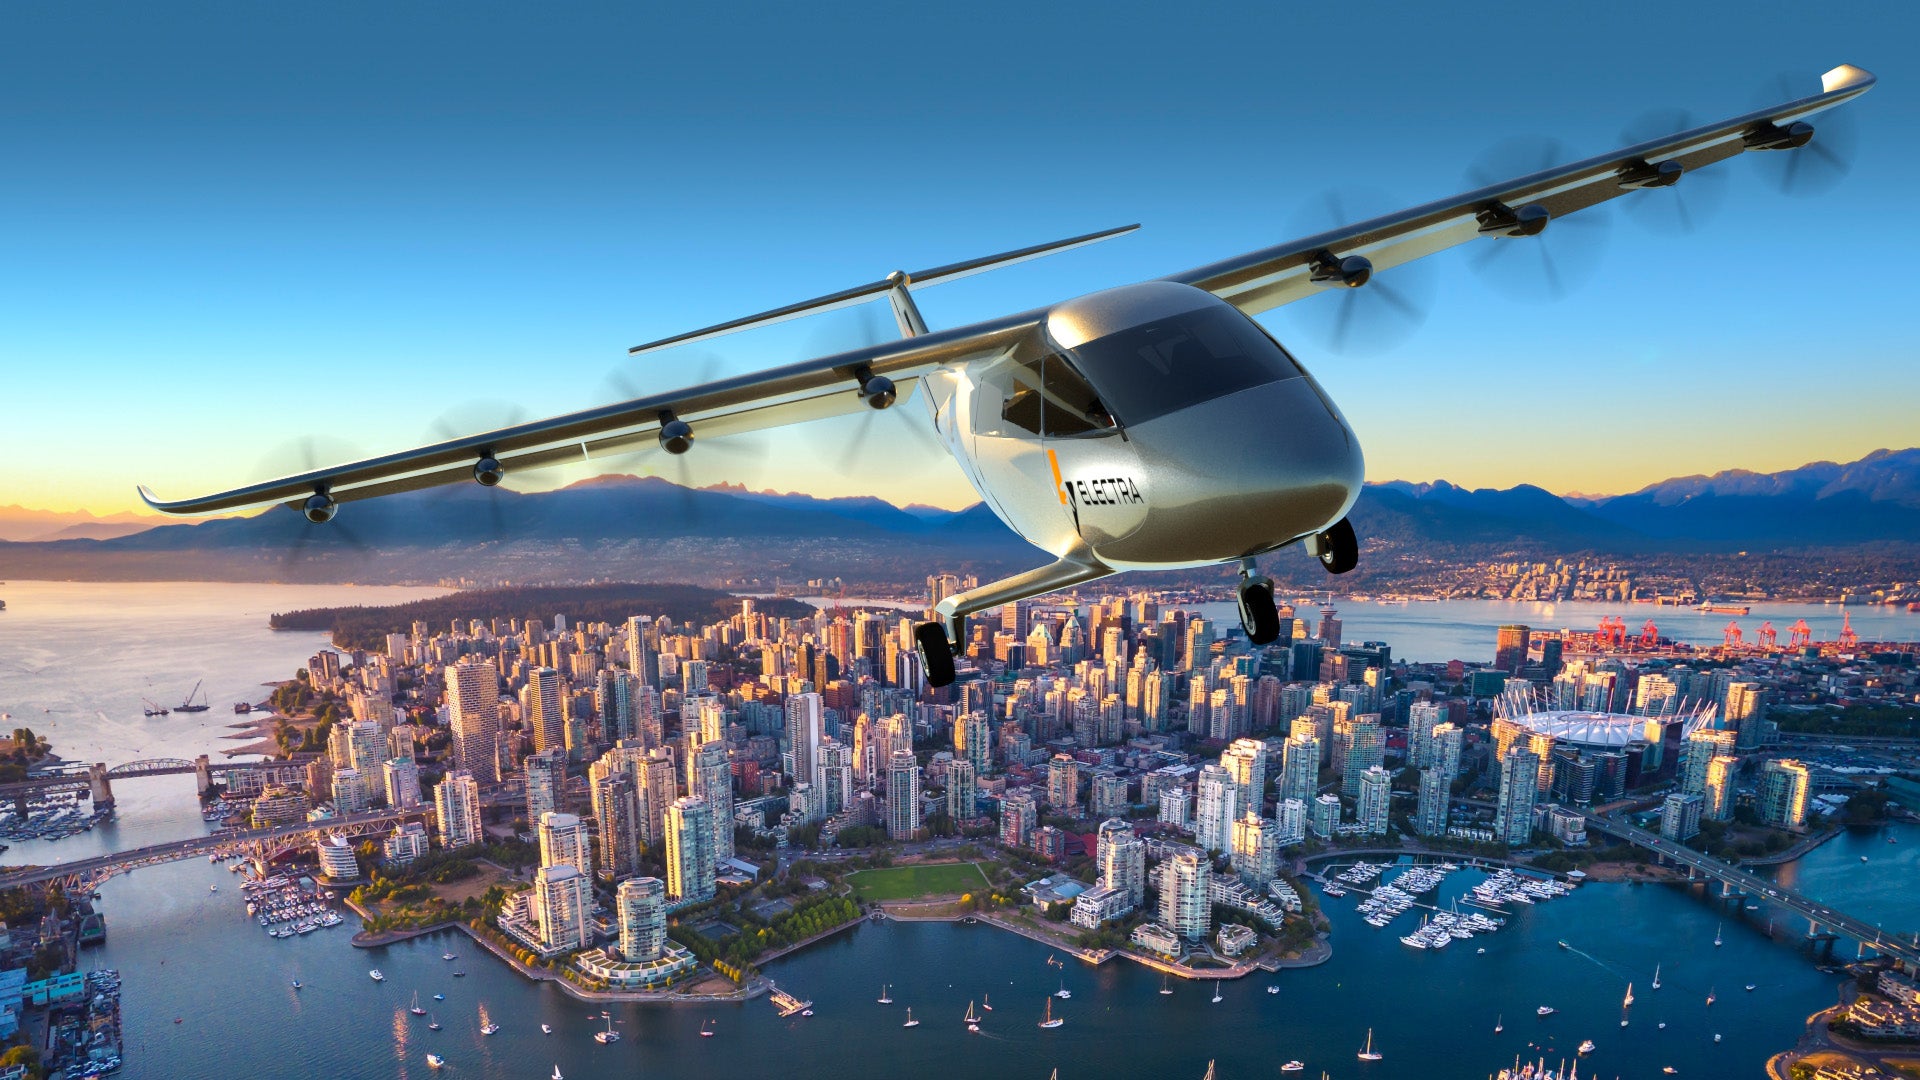 Electra.aero Surpasses 2,000 Orders for Hybrid-Electric Aircraft